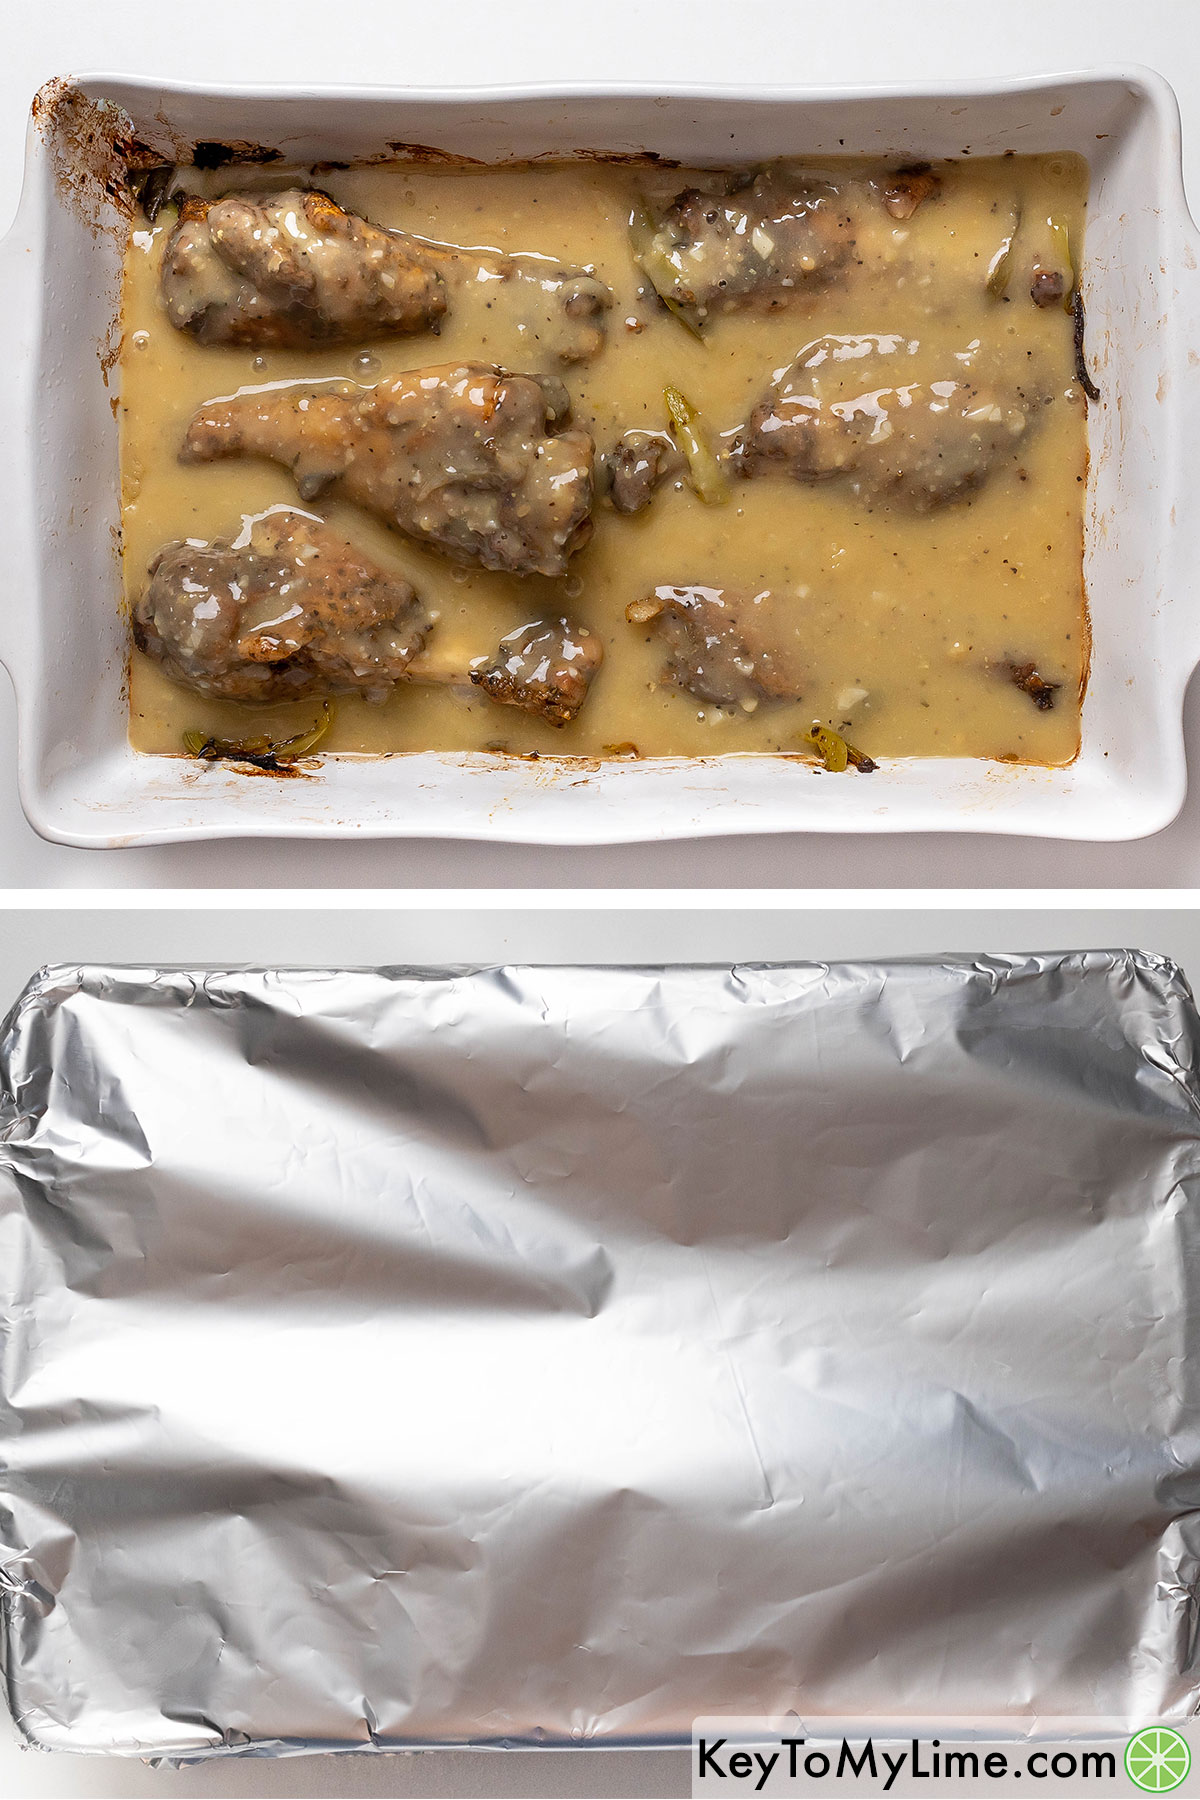 Pouring gravy over the wings, and then adding the casserole back to the oven covered with aluminum foil.